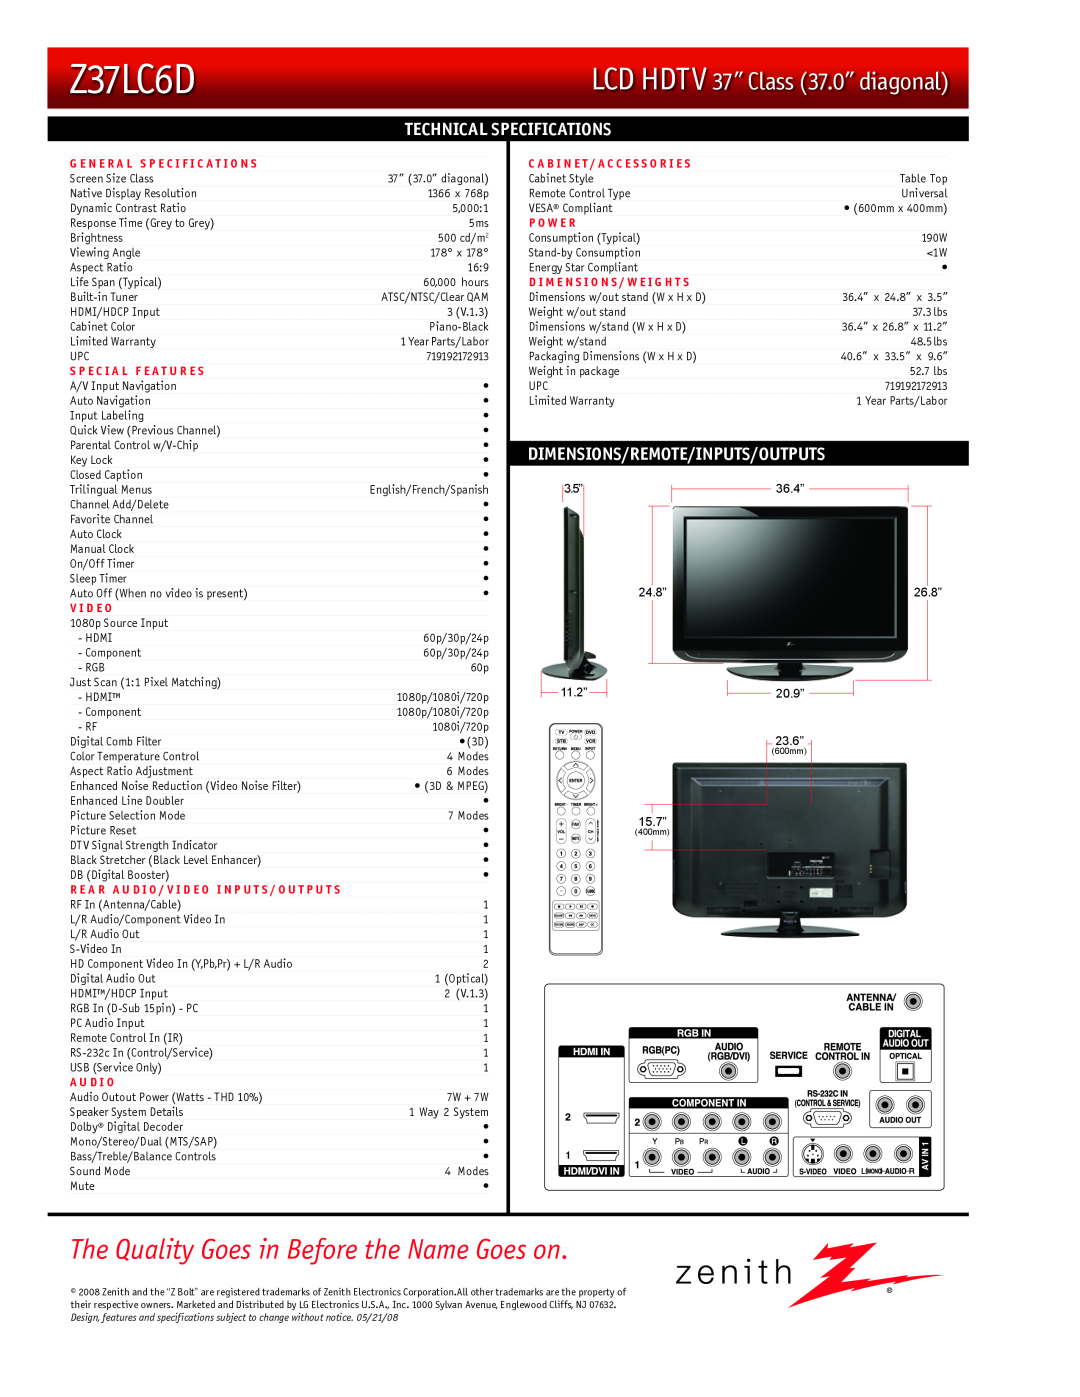 Zenith Z37LC6D Technical Specifications, Dimensions/Remote/Inputs/Outputs, The Quality Goes in Before the Name Goes on 